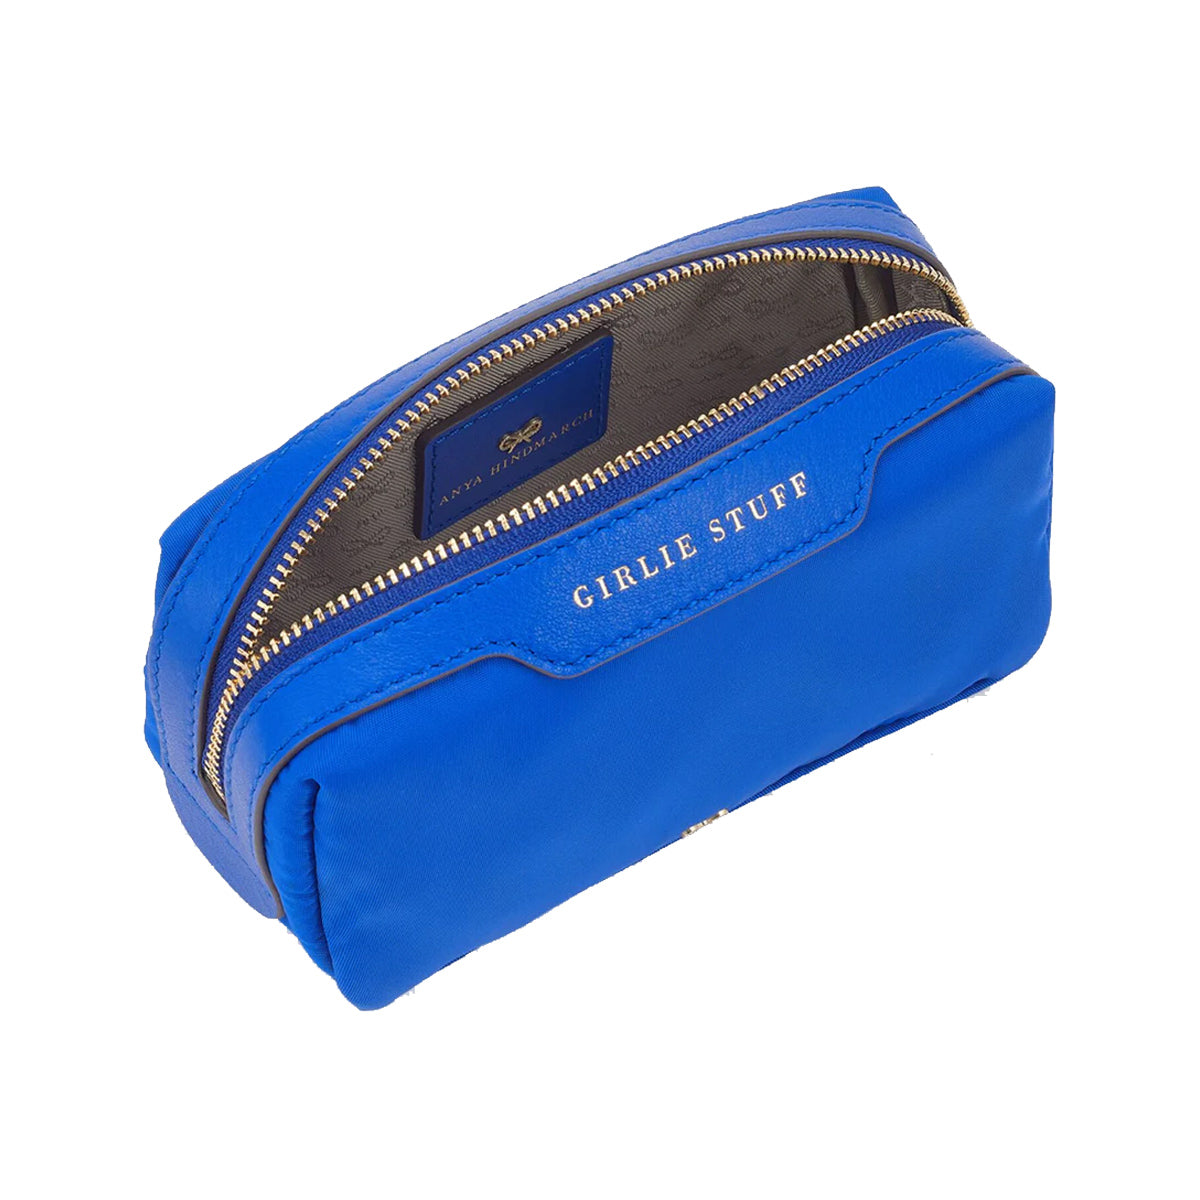 "Girlie Stuff" Pouch in Blue Nylon - Anya Hindmarch